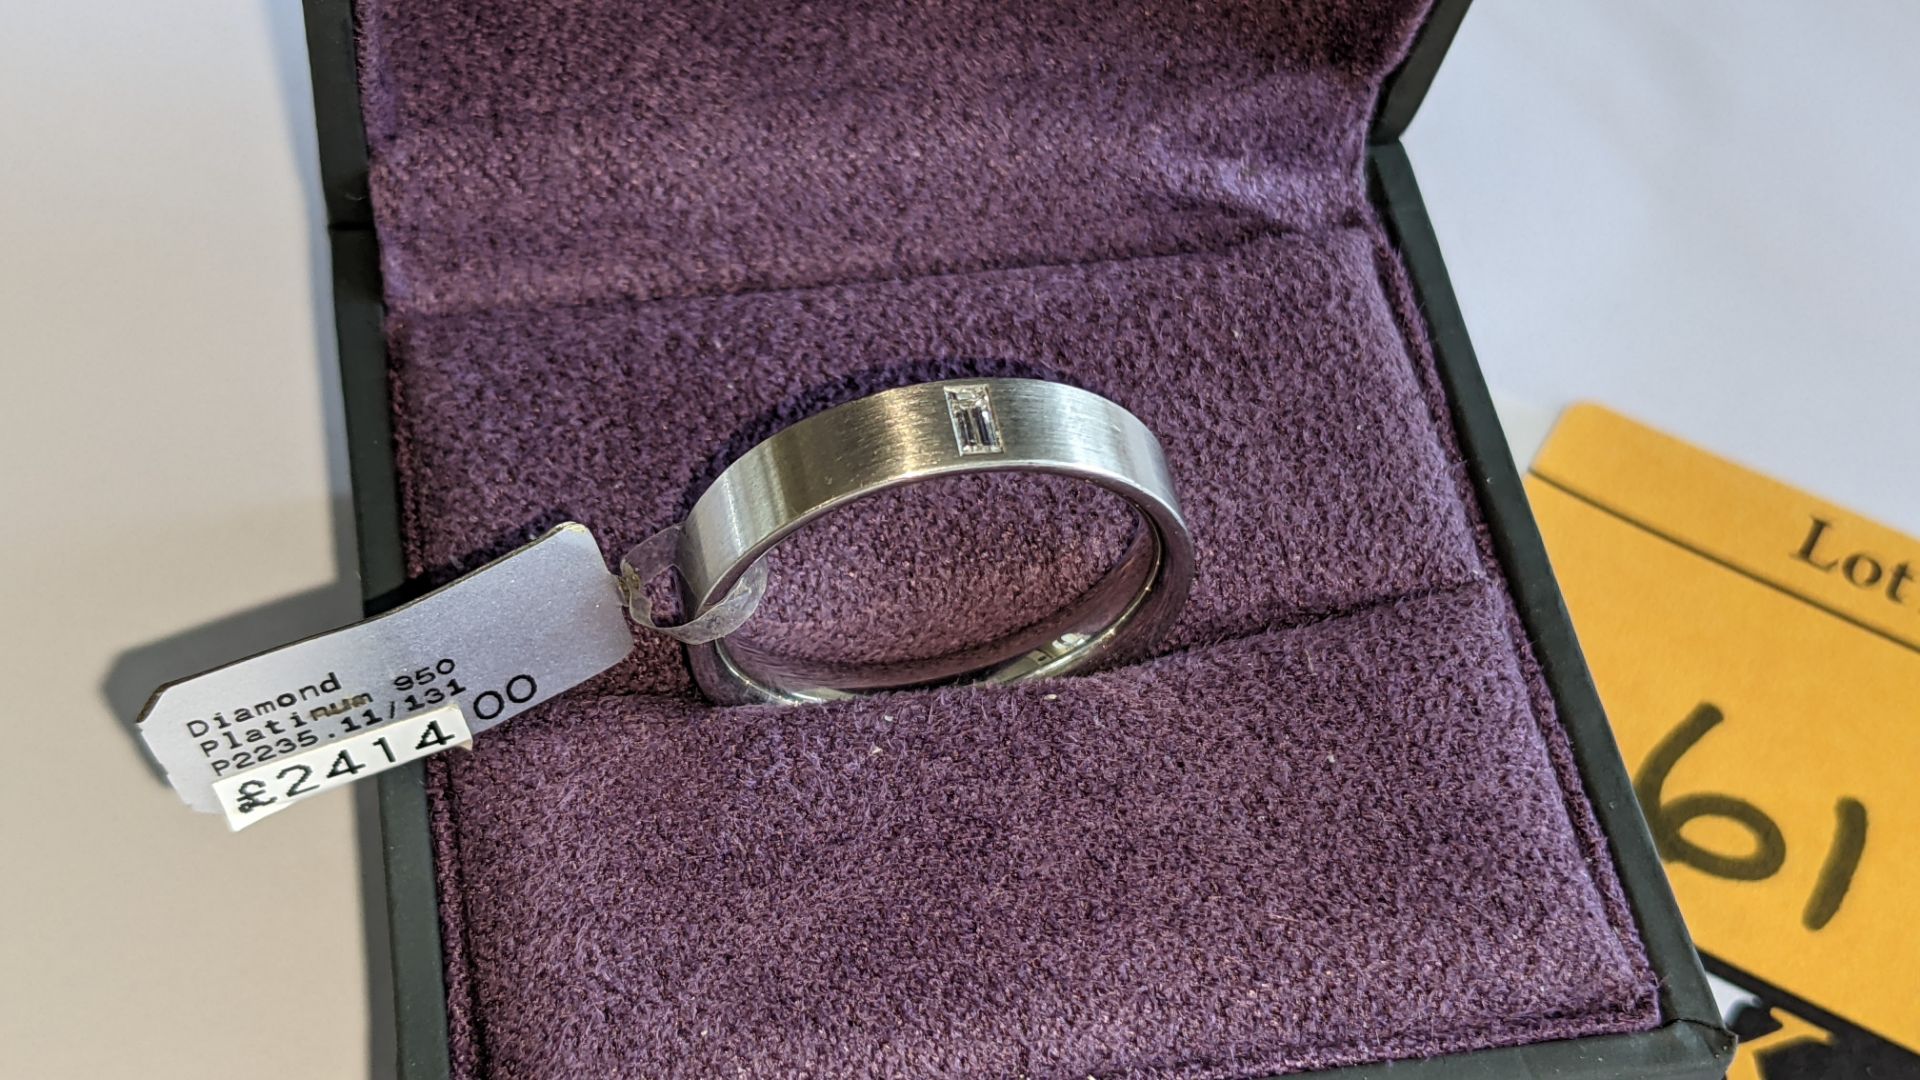 Platinum 950 ring with baguette diamond weighing 0.11ct. RRP £2,414 - Image 2 of 13